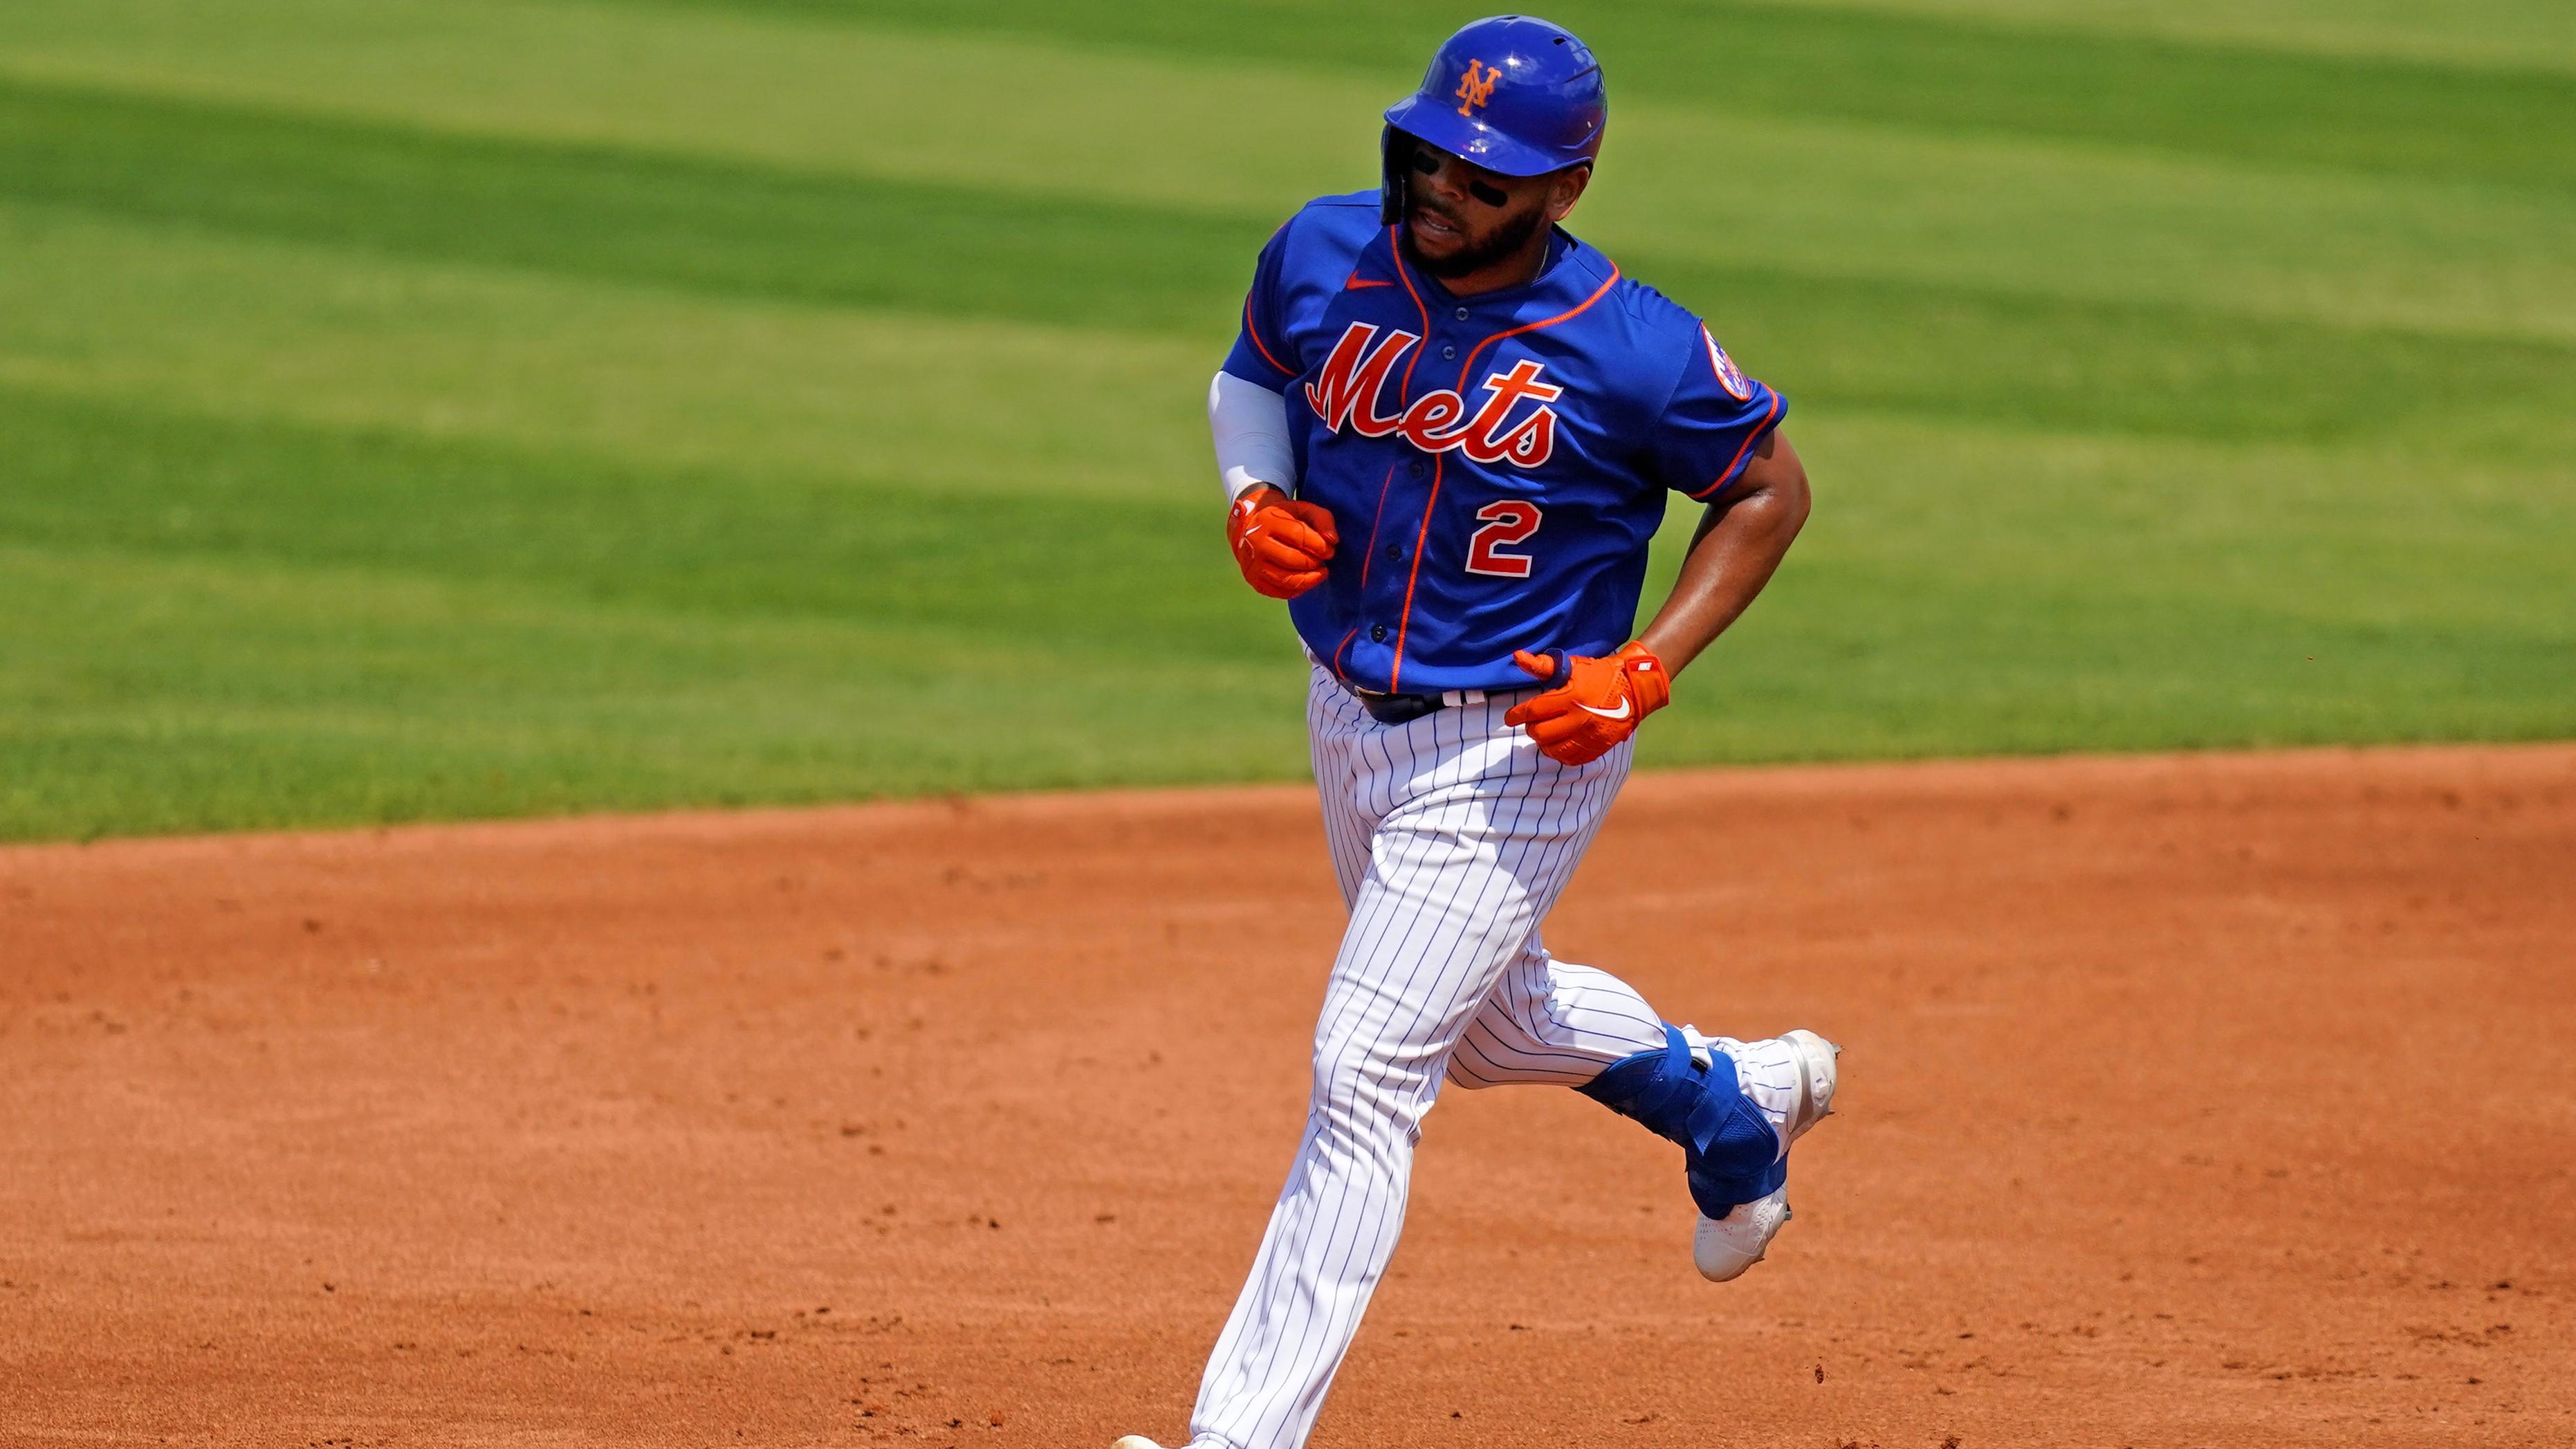 Mar 16, 2021; Port St. Lucie, Florida, USA; New York Mets left fielder Dominic Smith (2) rounds the bases after hitting a three-run homerun in the 3rd inning of the spring training game against the Houston Astros at Clover Park. / Jasen Vinlove-USA TODAY Sports